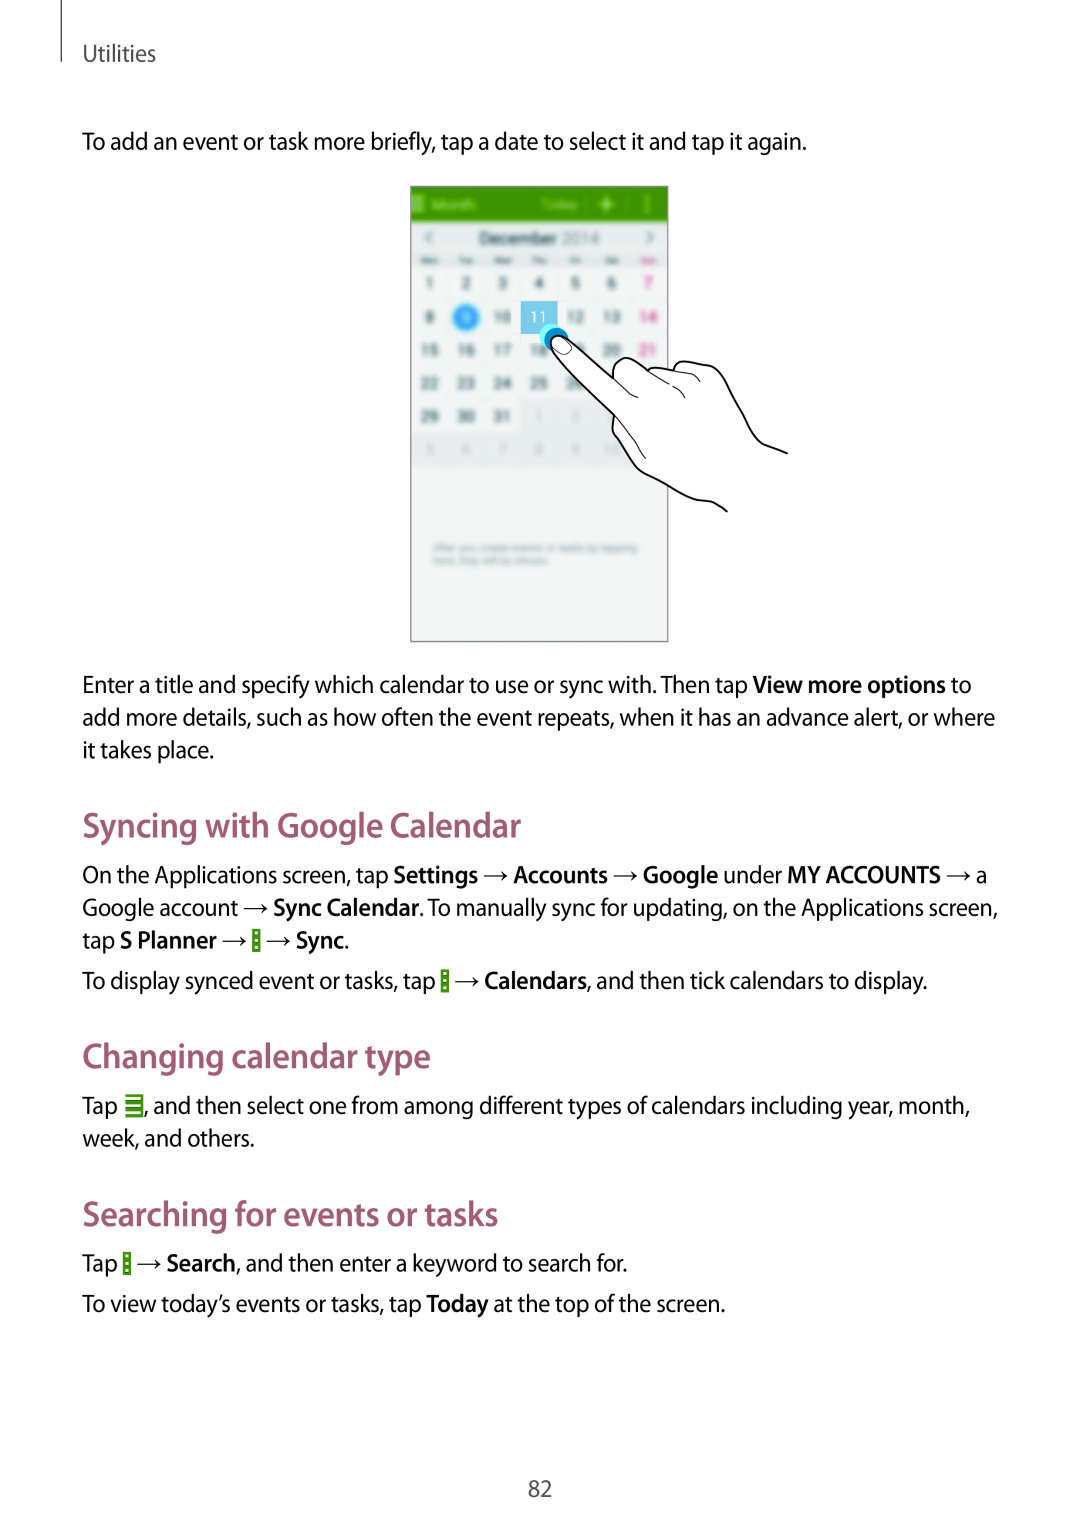 Samsung GT-I9195ZKIDBT Syncing with Google Calendar, Changing calendar type, Searching for events or tasks, Utilities 